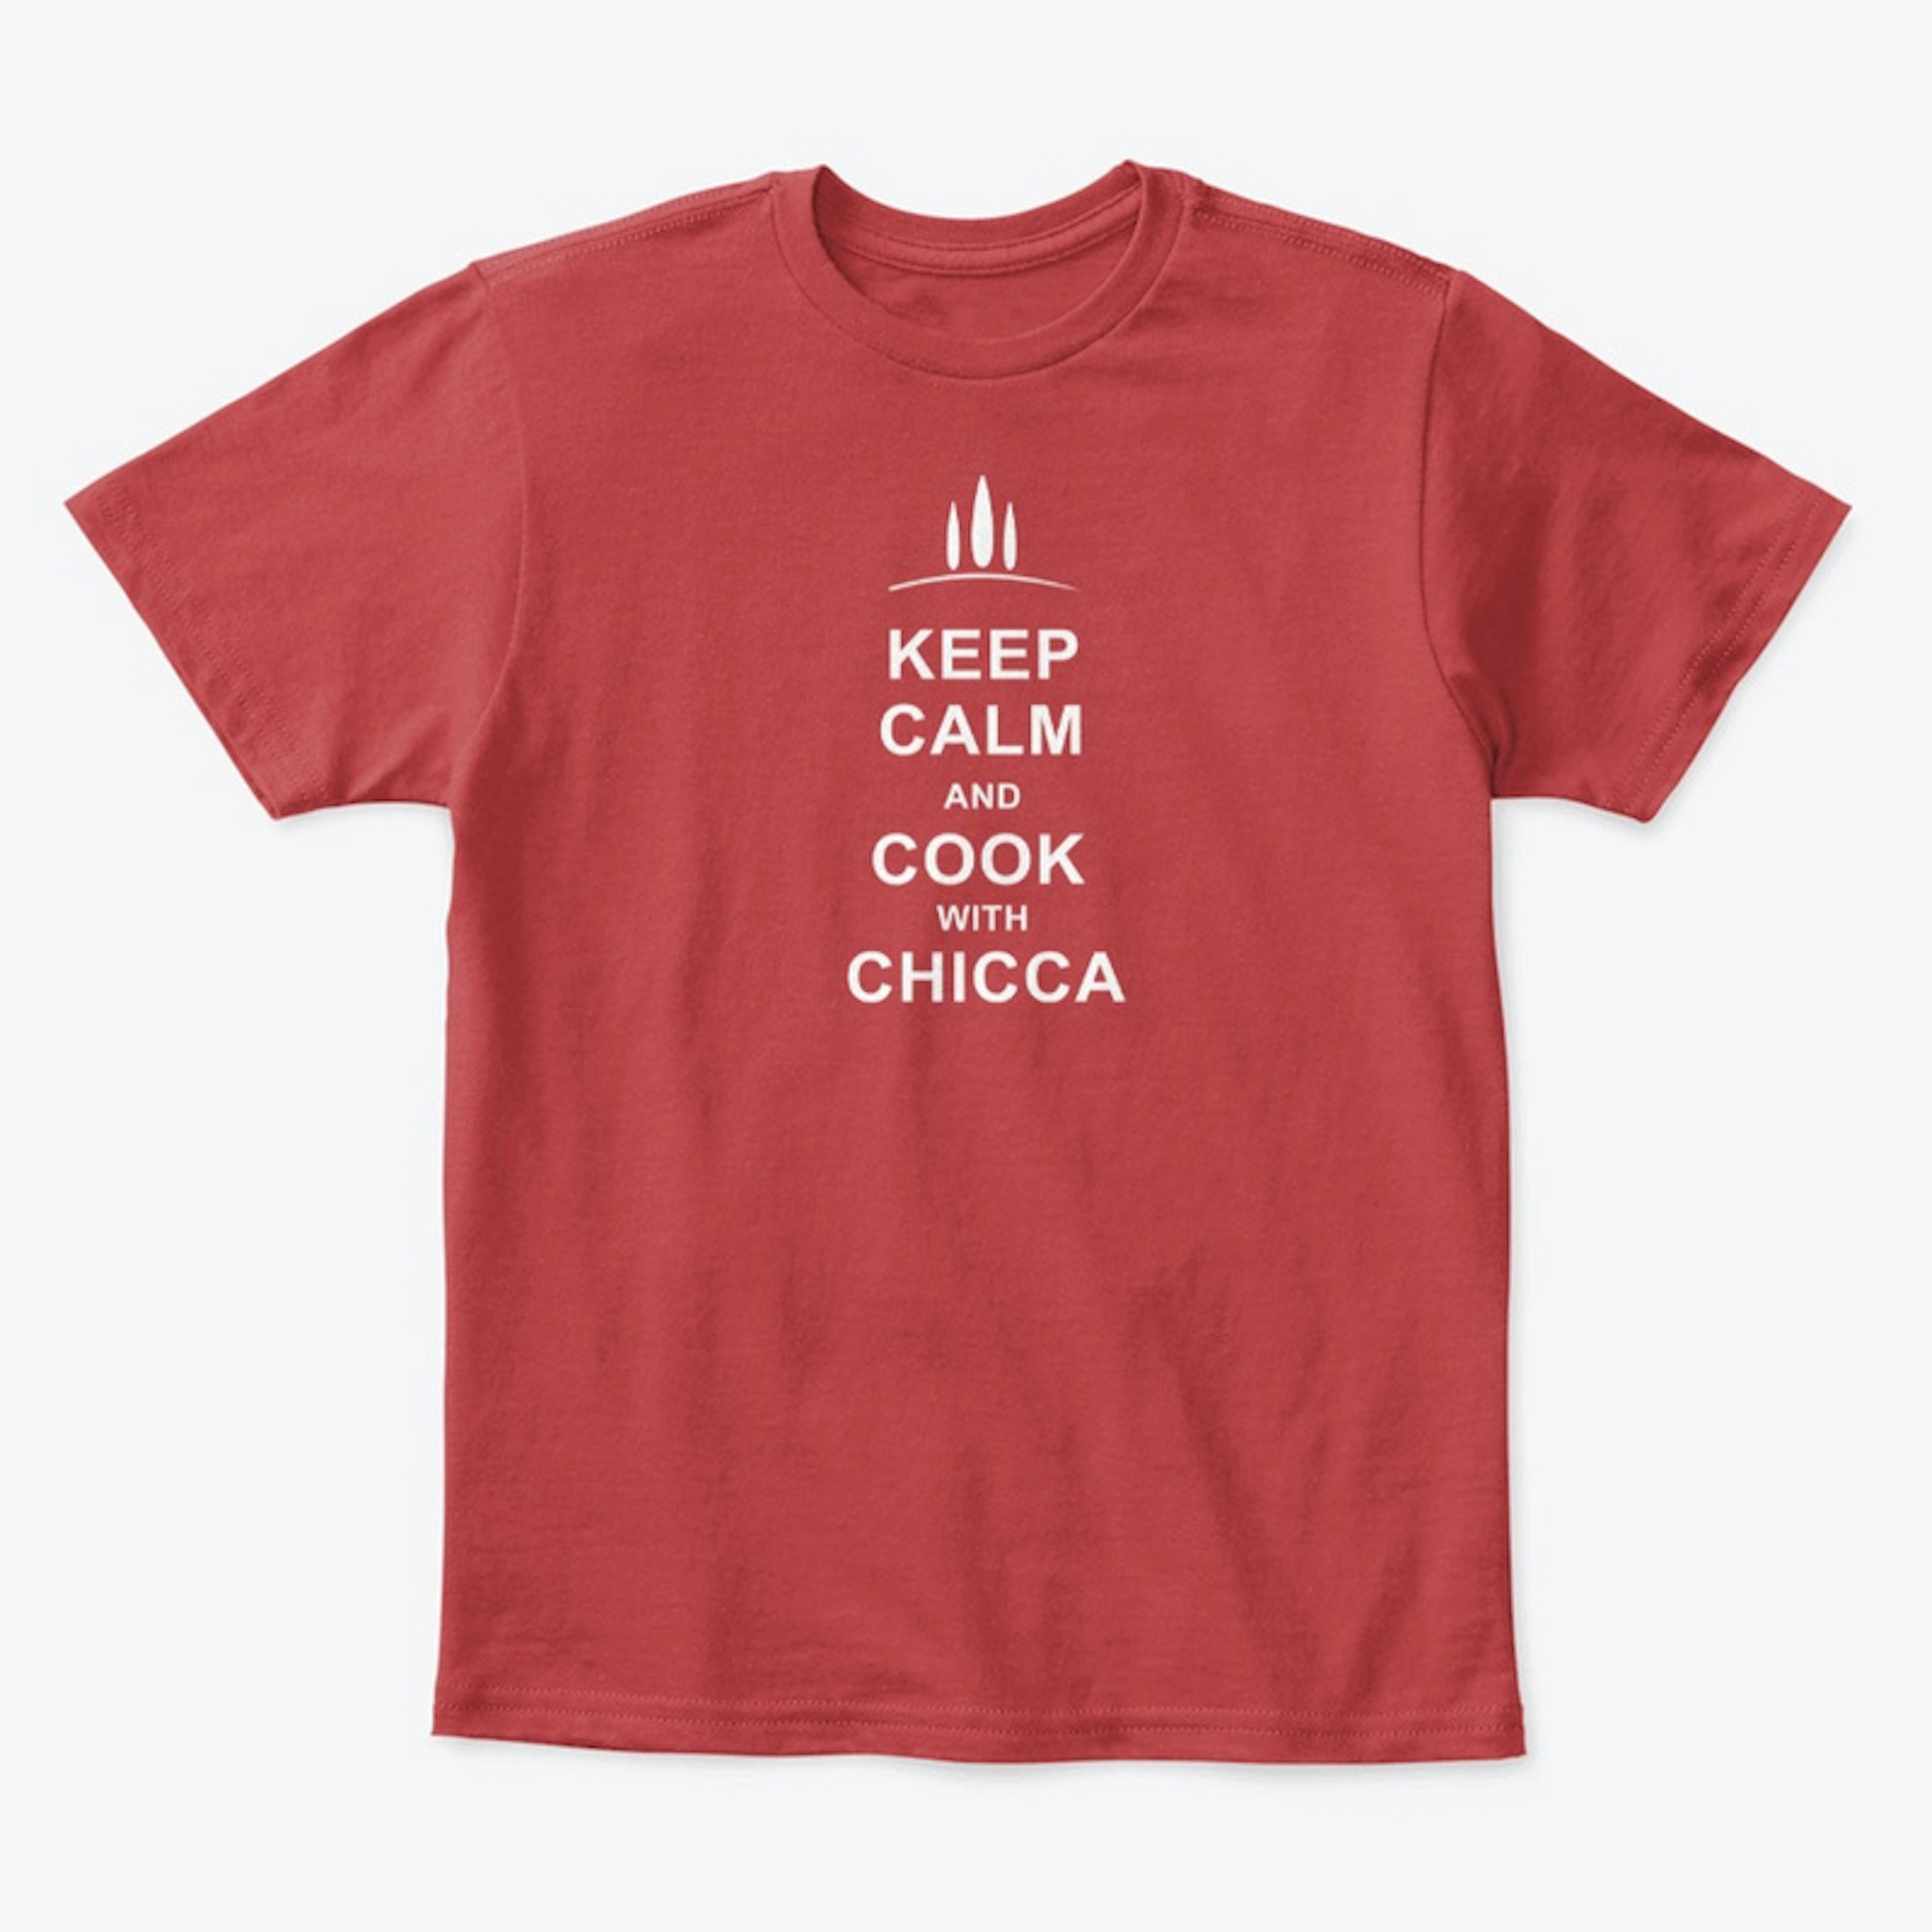 Keep Calm With Chicca Shirts